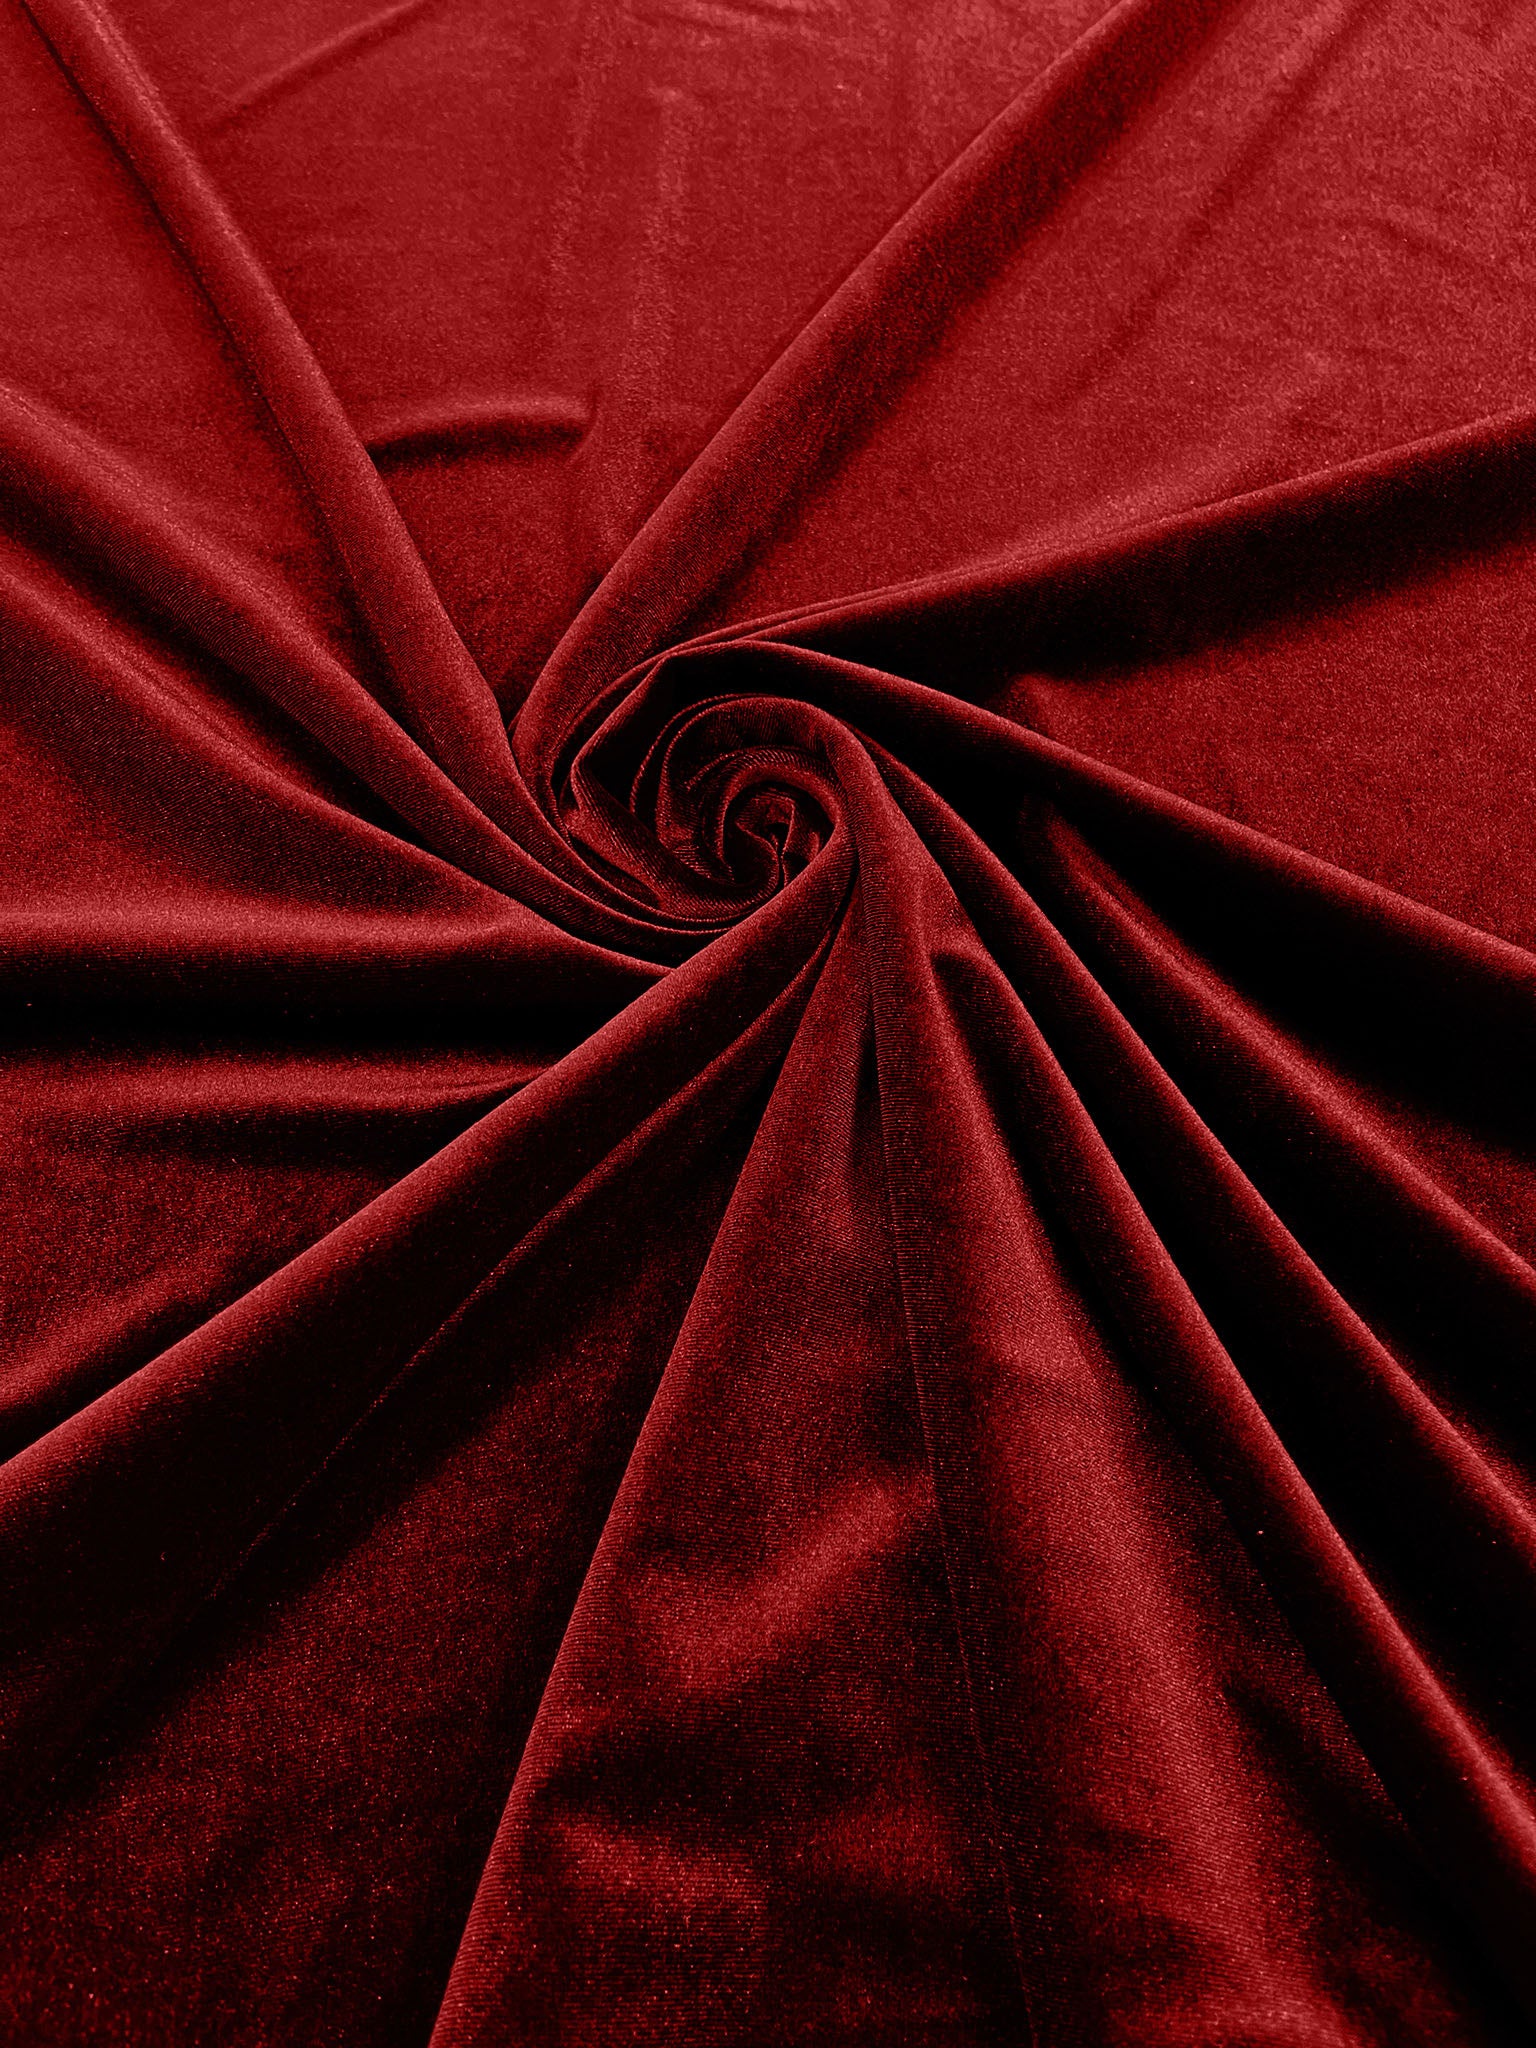 Red Stretch Velvet Polyester Spandex 60" Wide | Plush Velvet For Christmas, Apparel, Cosplay, Curtains, Decoration, Costume